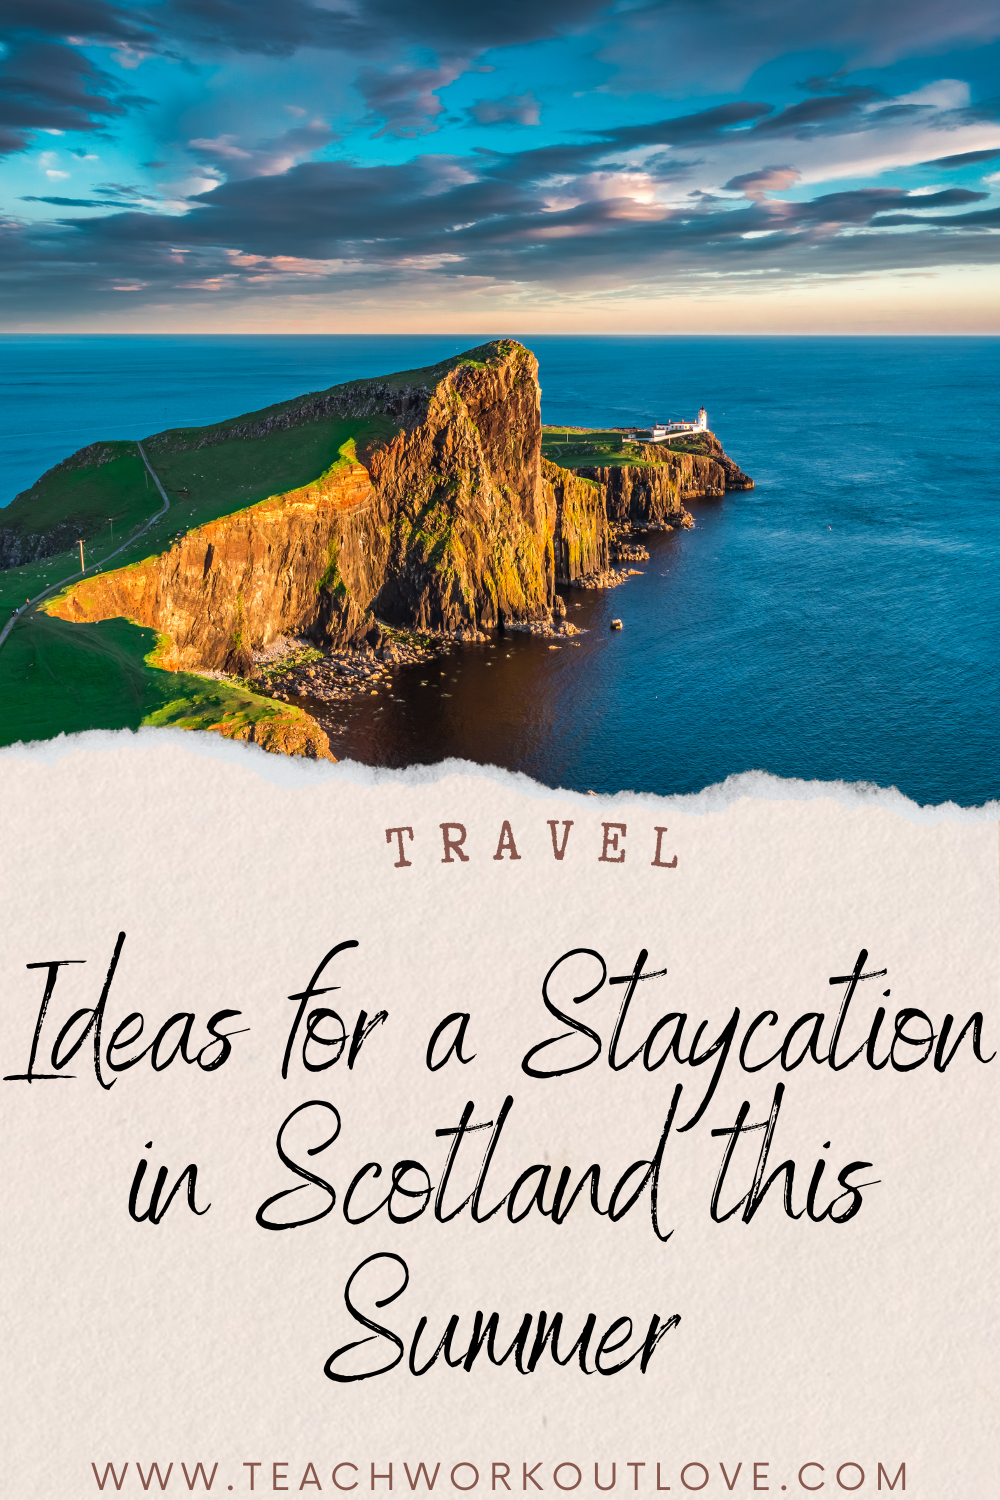 Here are some ideas to make the most of a staycation in Scotland this summer.